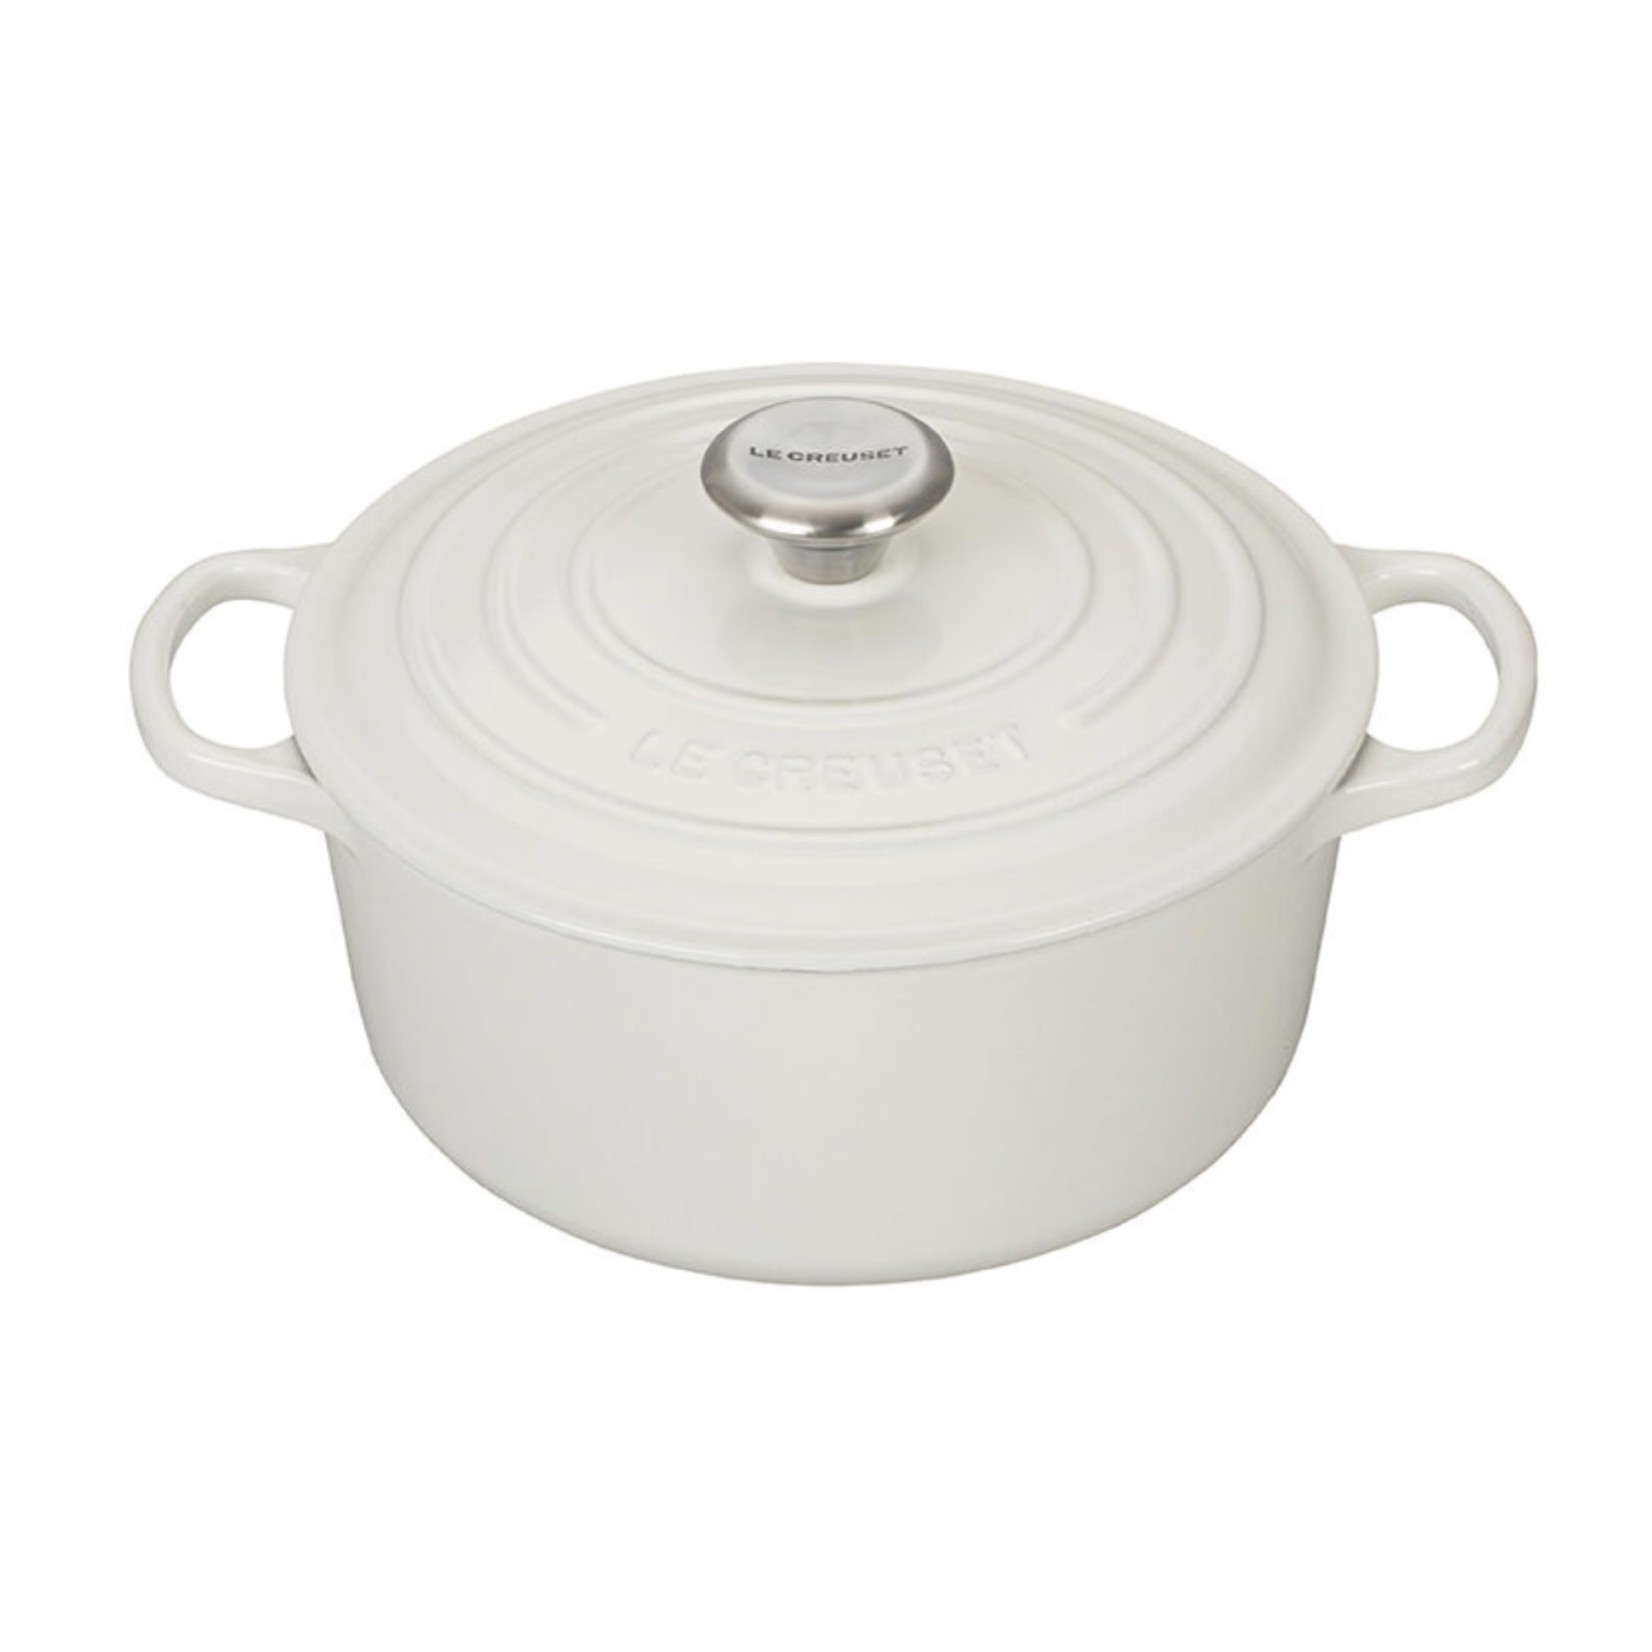 LE CREUSET LE CREUSET Round French Oven 4.2L